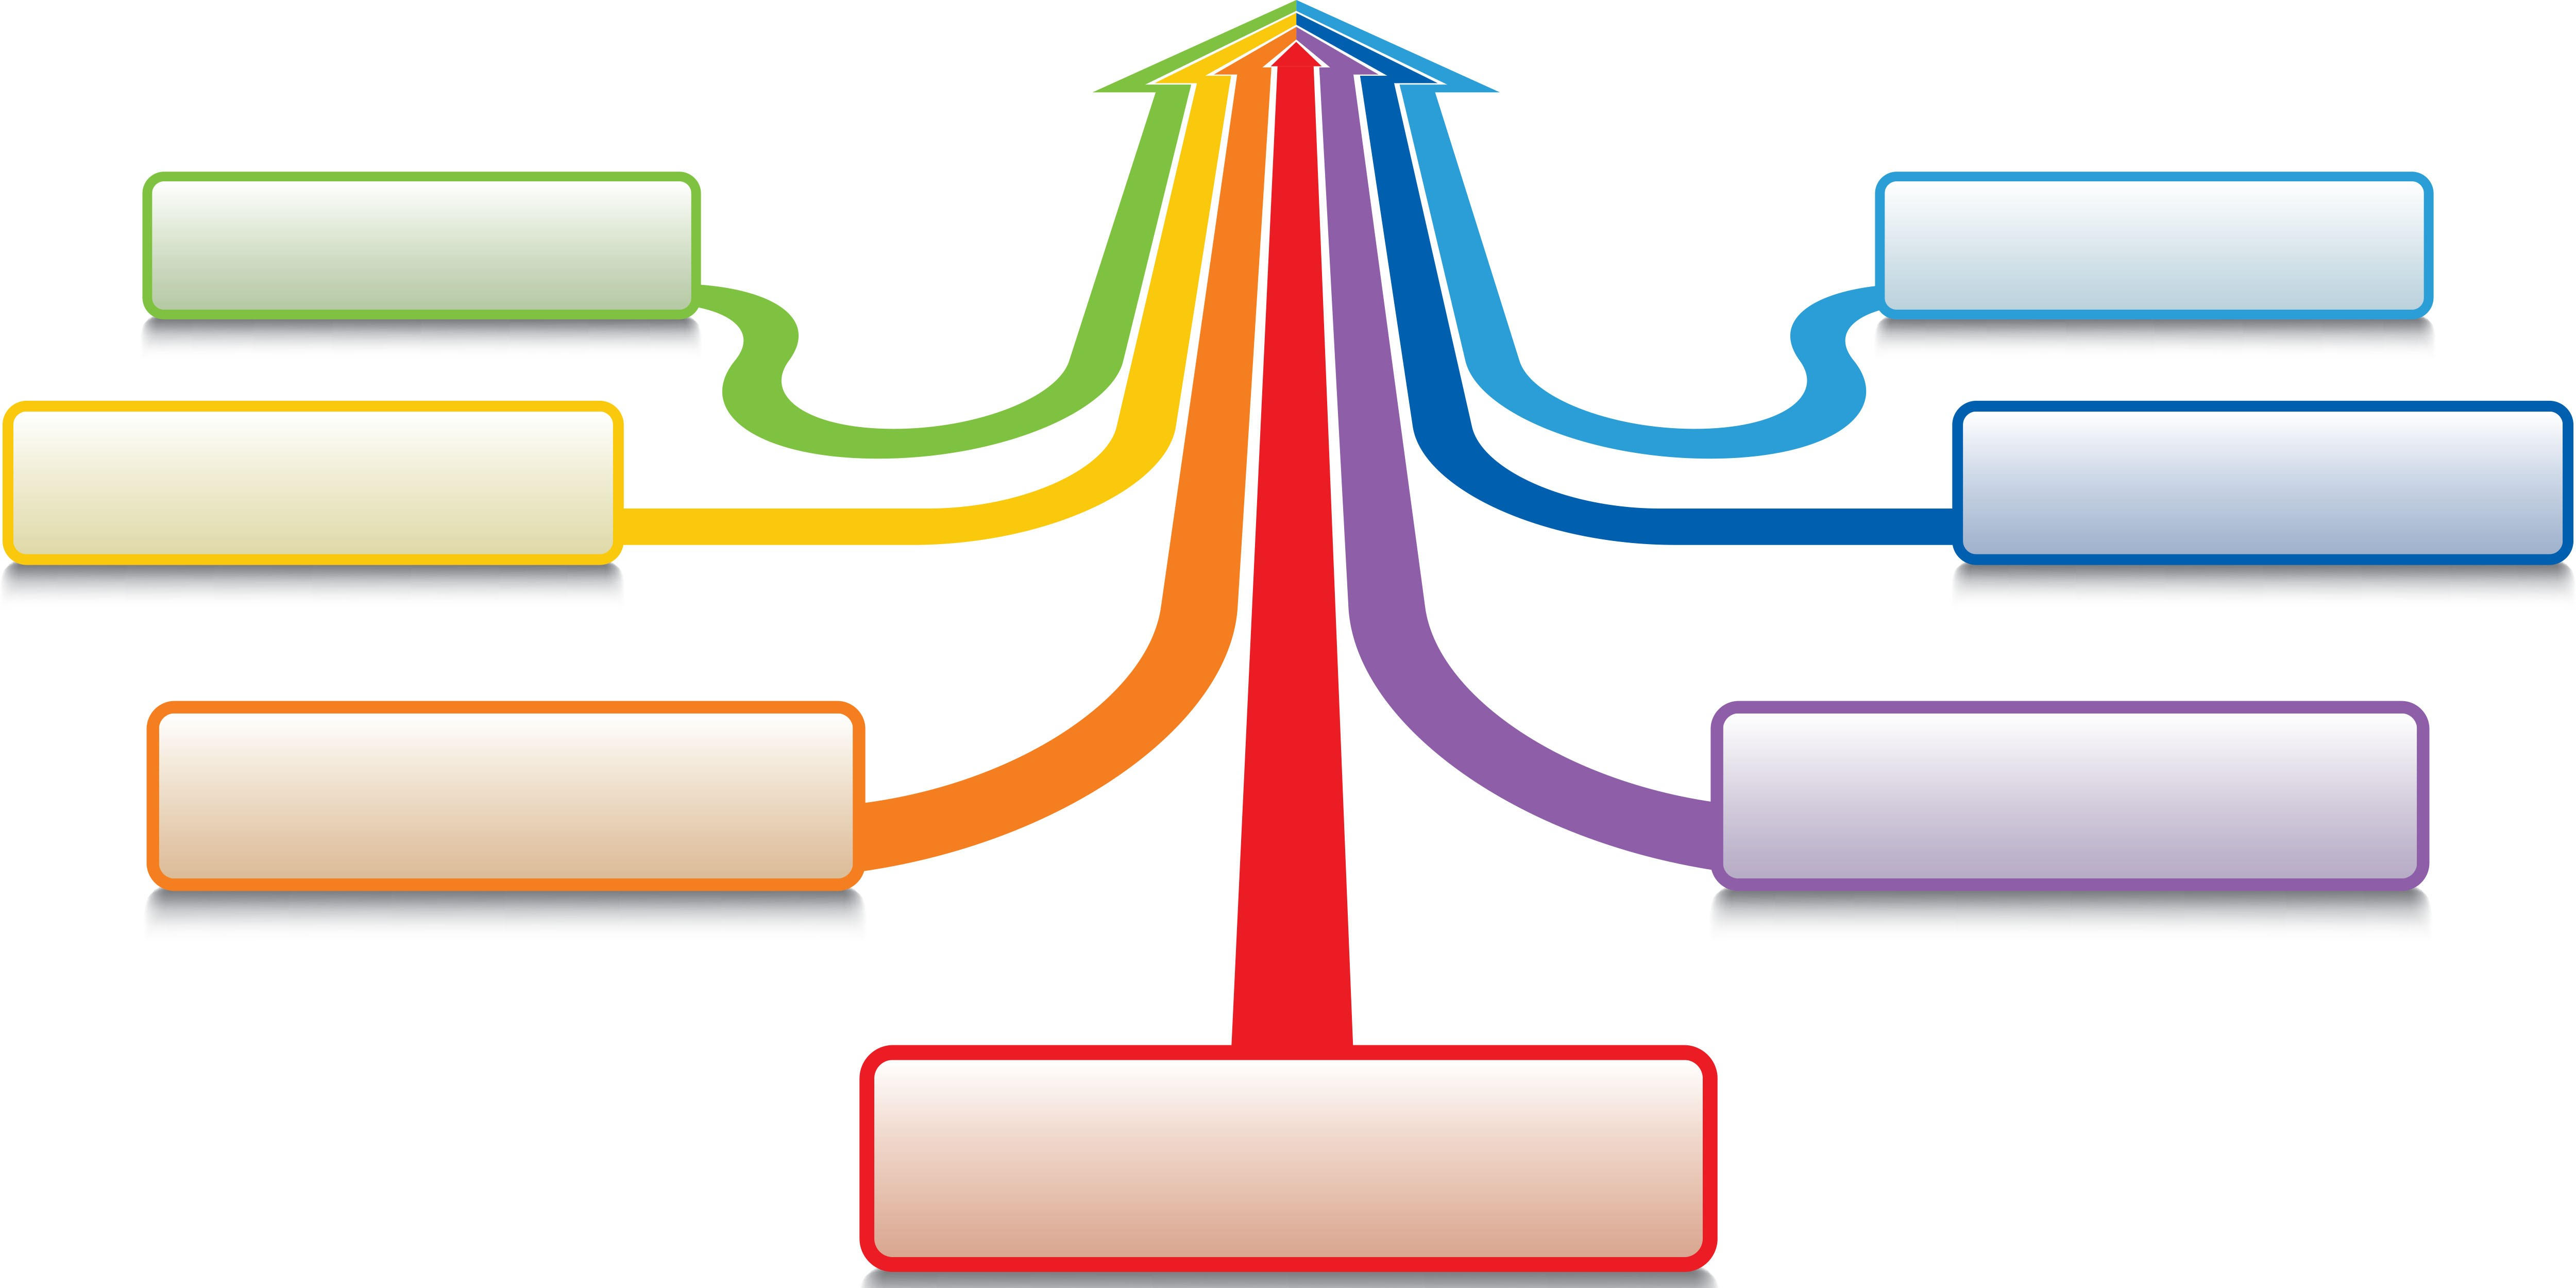 Multi-colored strands form a single arrow representing merging disparate data into one system